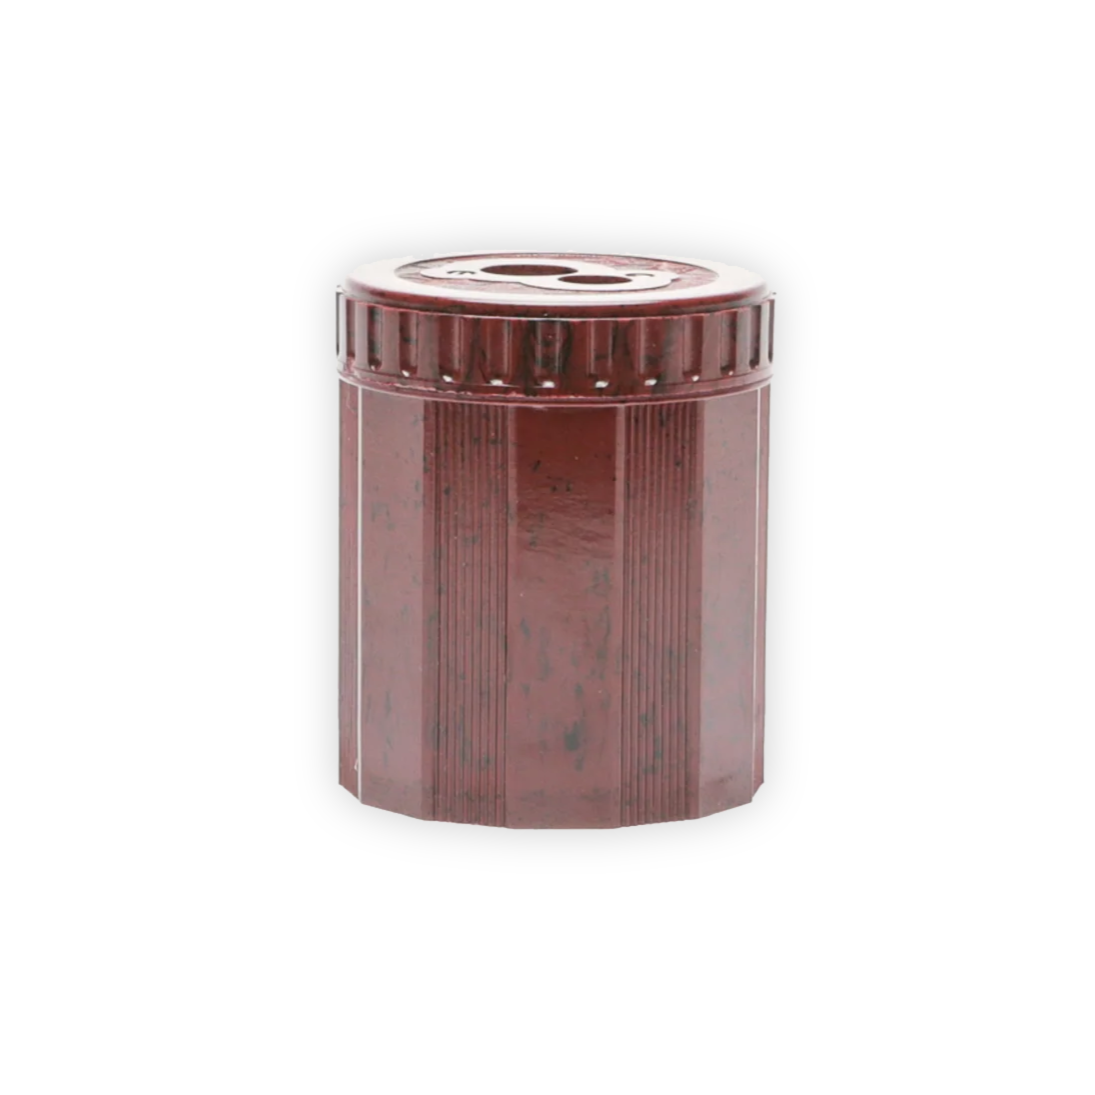 A red marbled pencil sharpener with screw-off top.